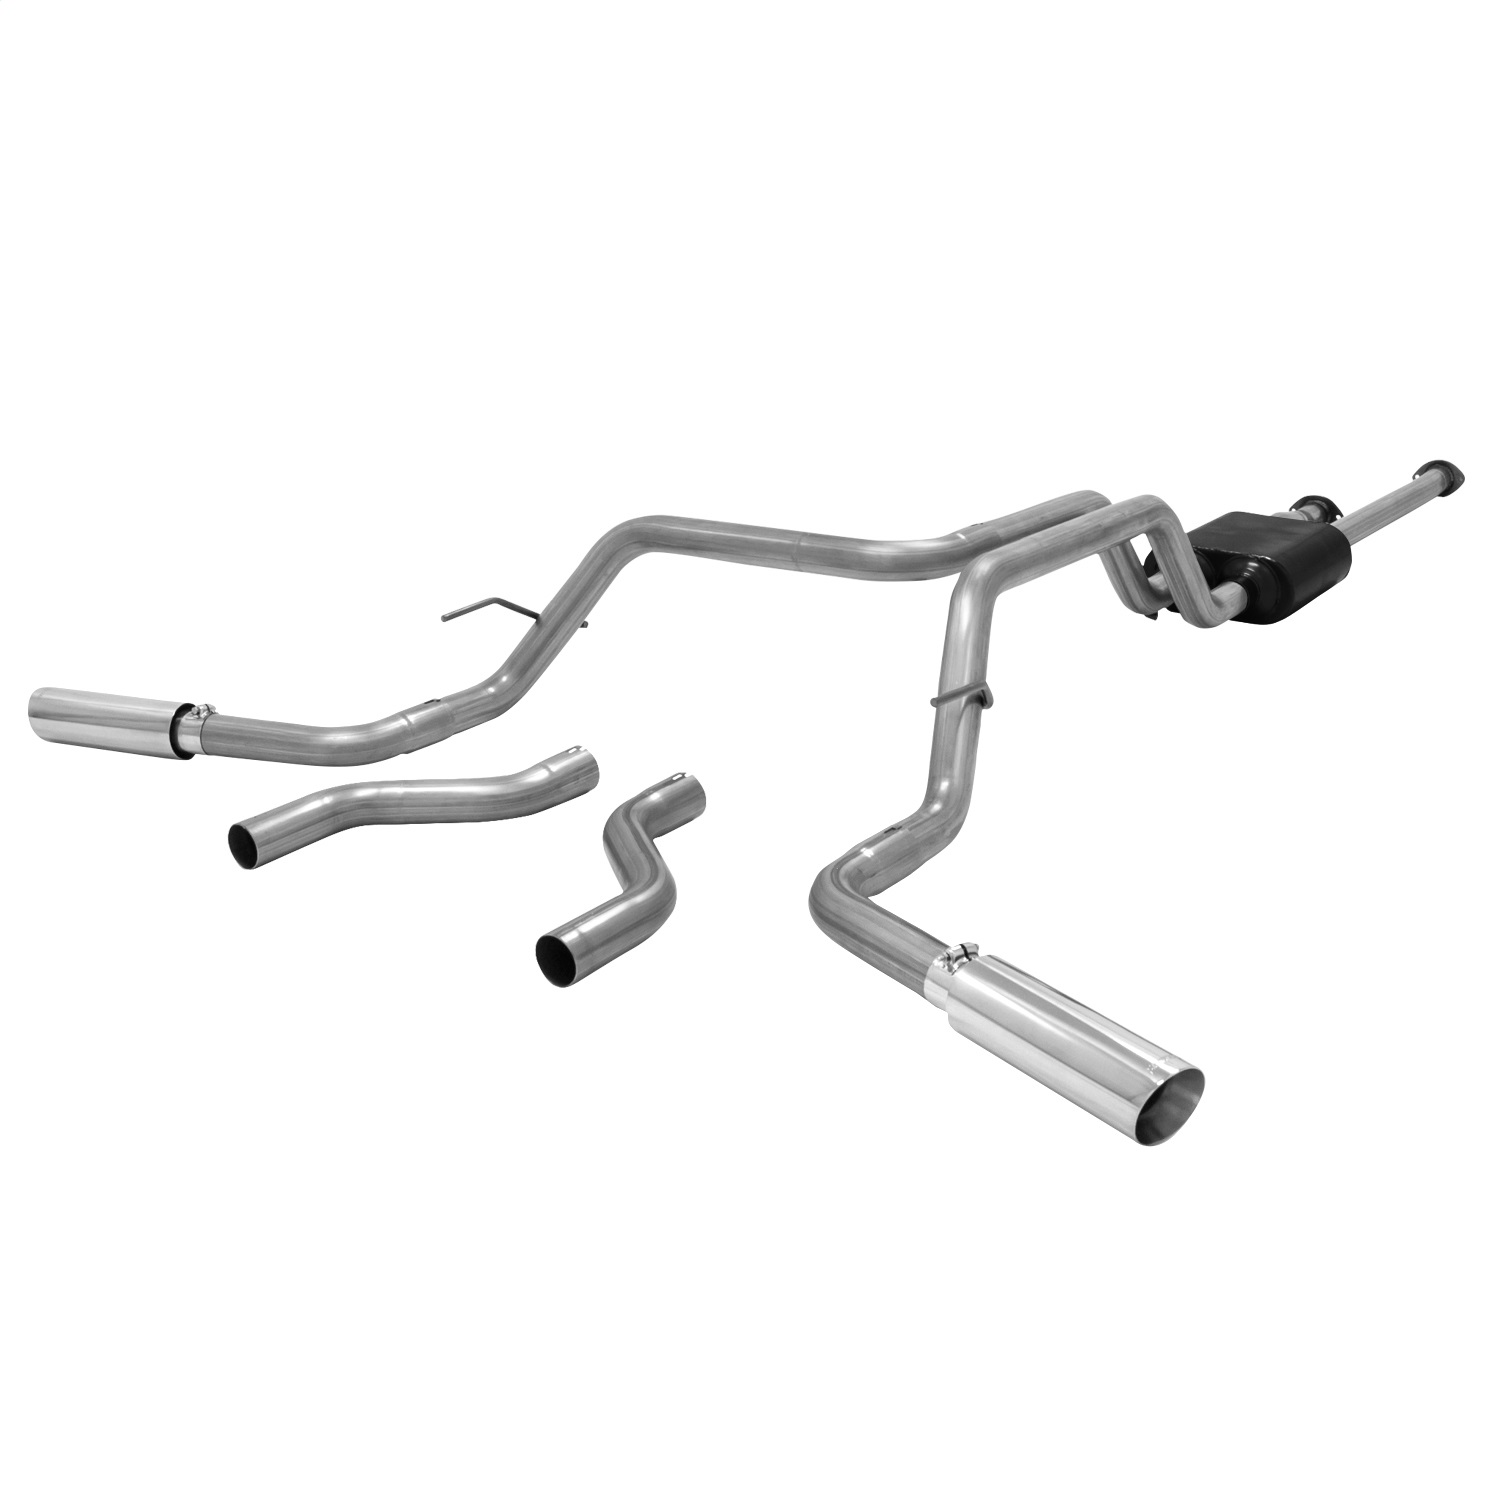 Flowmaster Flowmaster 817664 American Thunder Cat Back Exhaust System Fits 11-15 Tundra